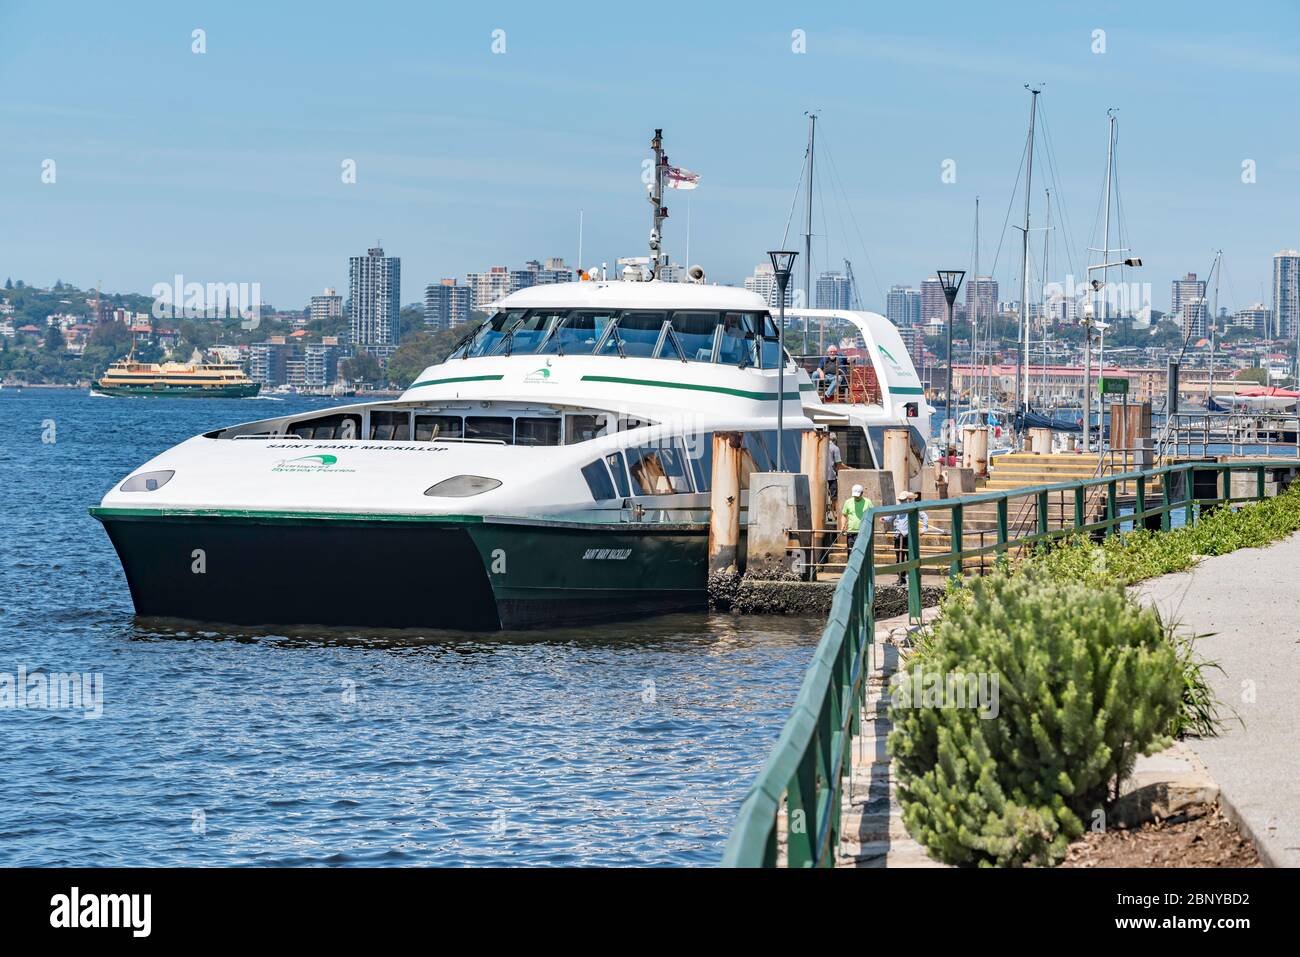 The Super Cat Class Sydney Ferry catamaran named Saint Mary Mackillop stopped at North Sydney Wharf in Sydney Harbour, Australia Stock Photo